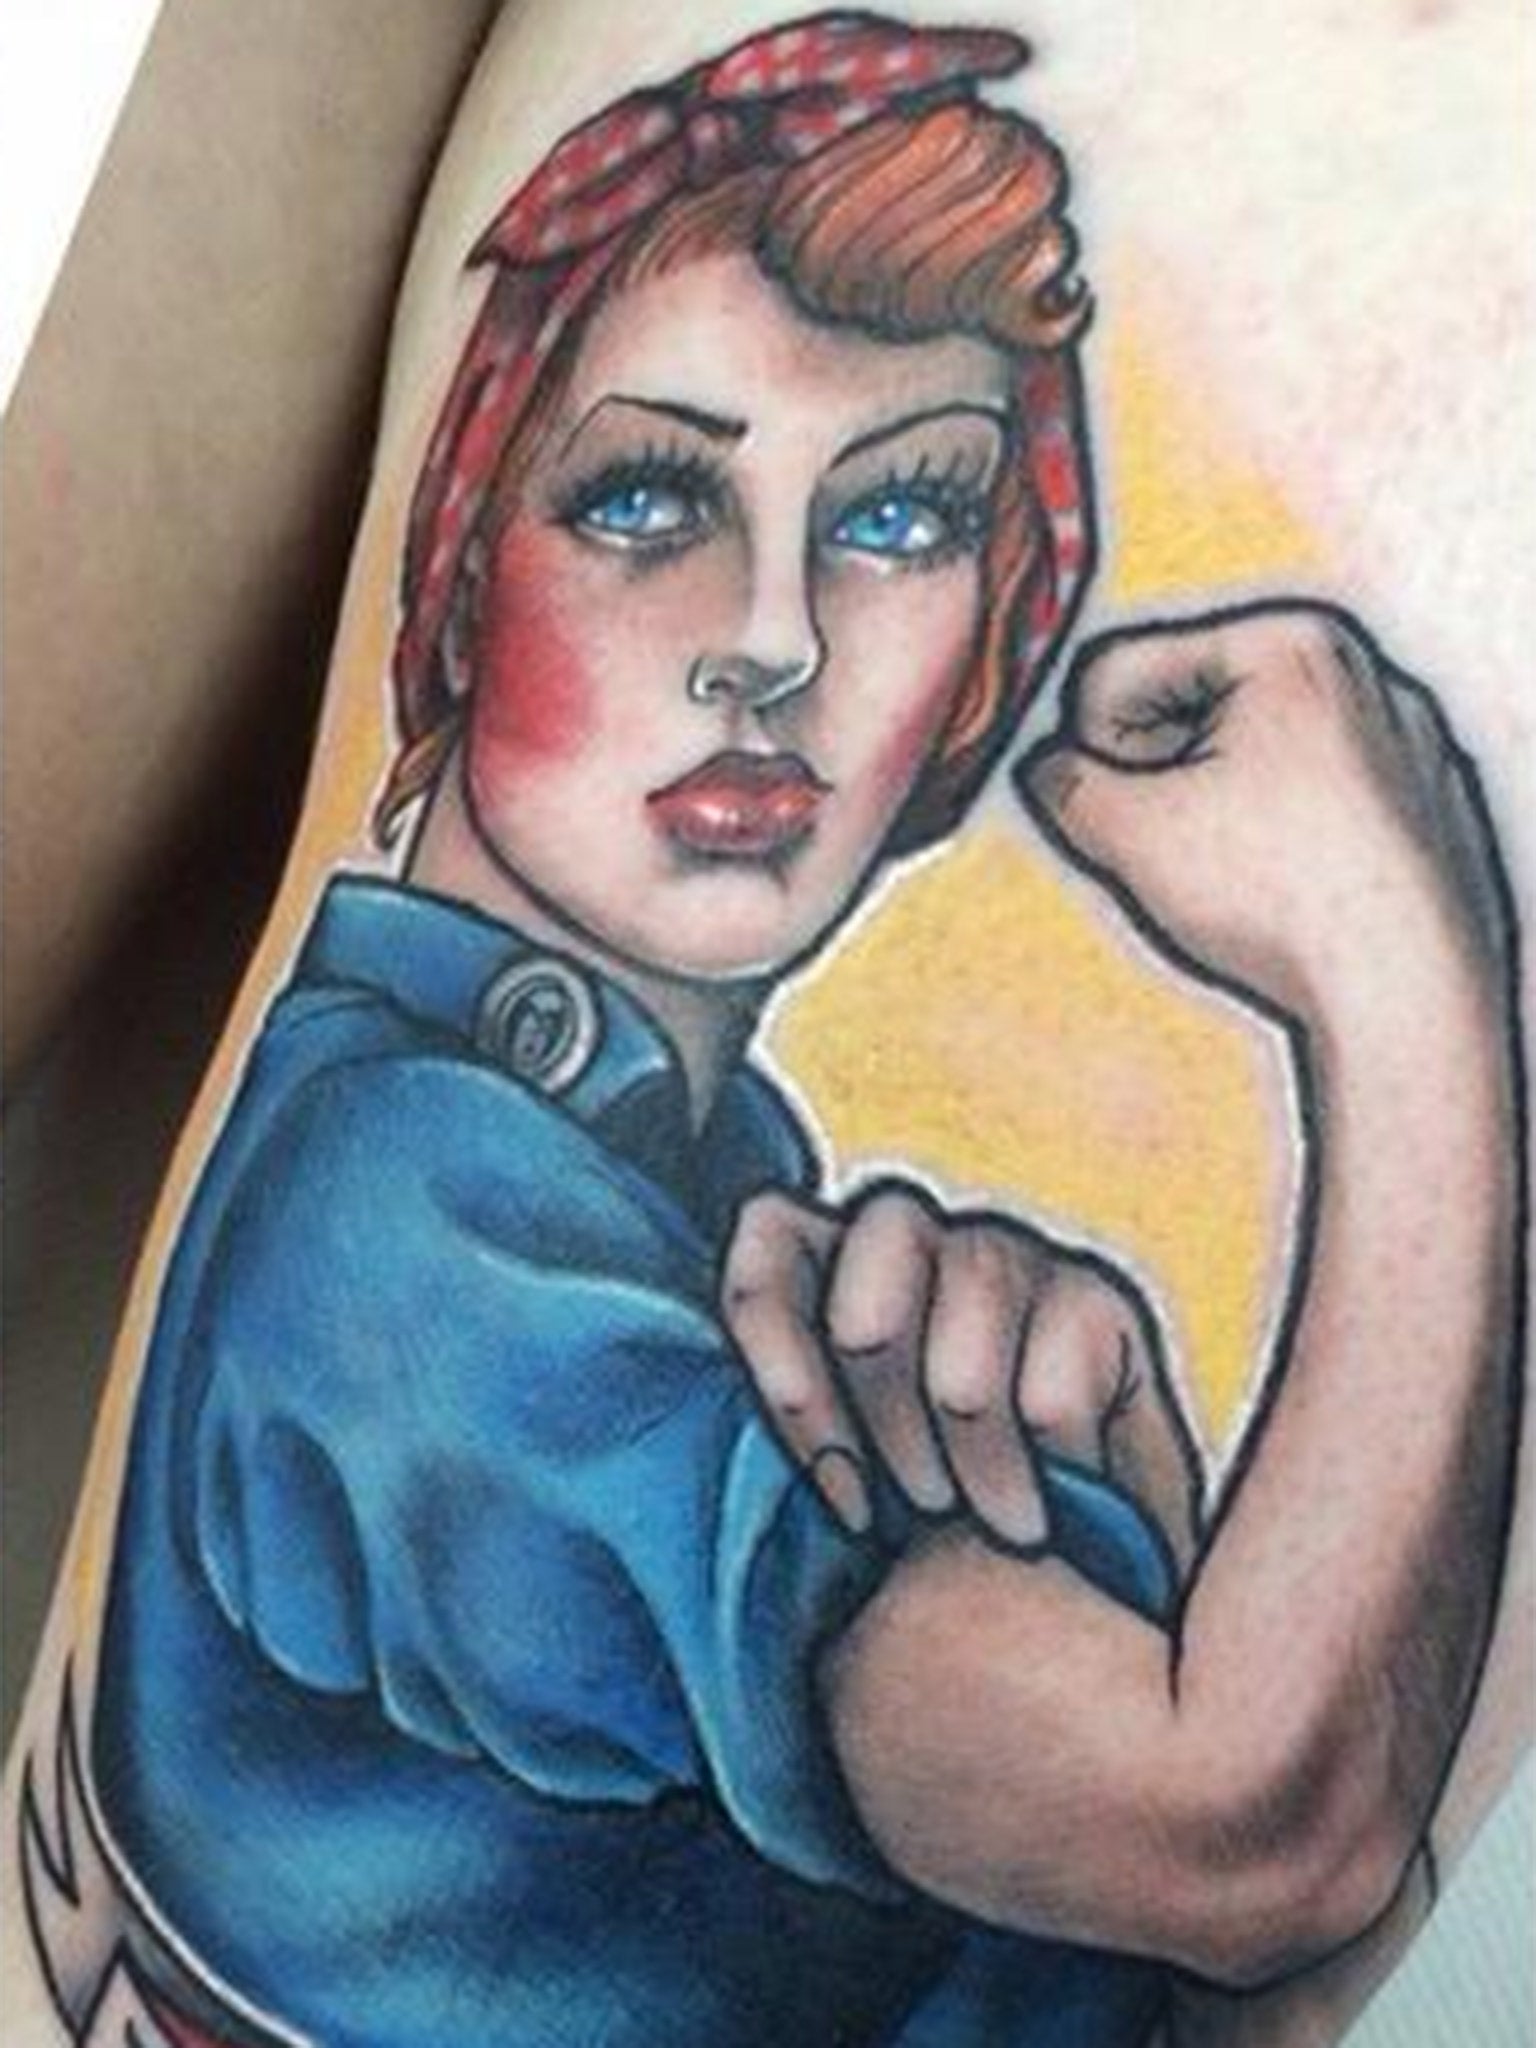 Beyoncé poses as Rosie the Riveter: the wartime poster girl who